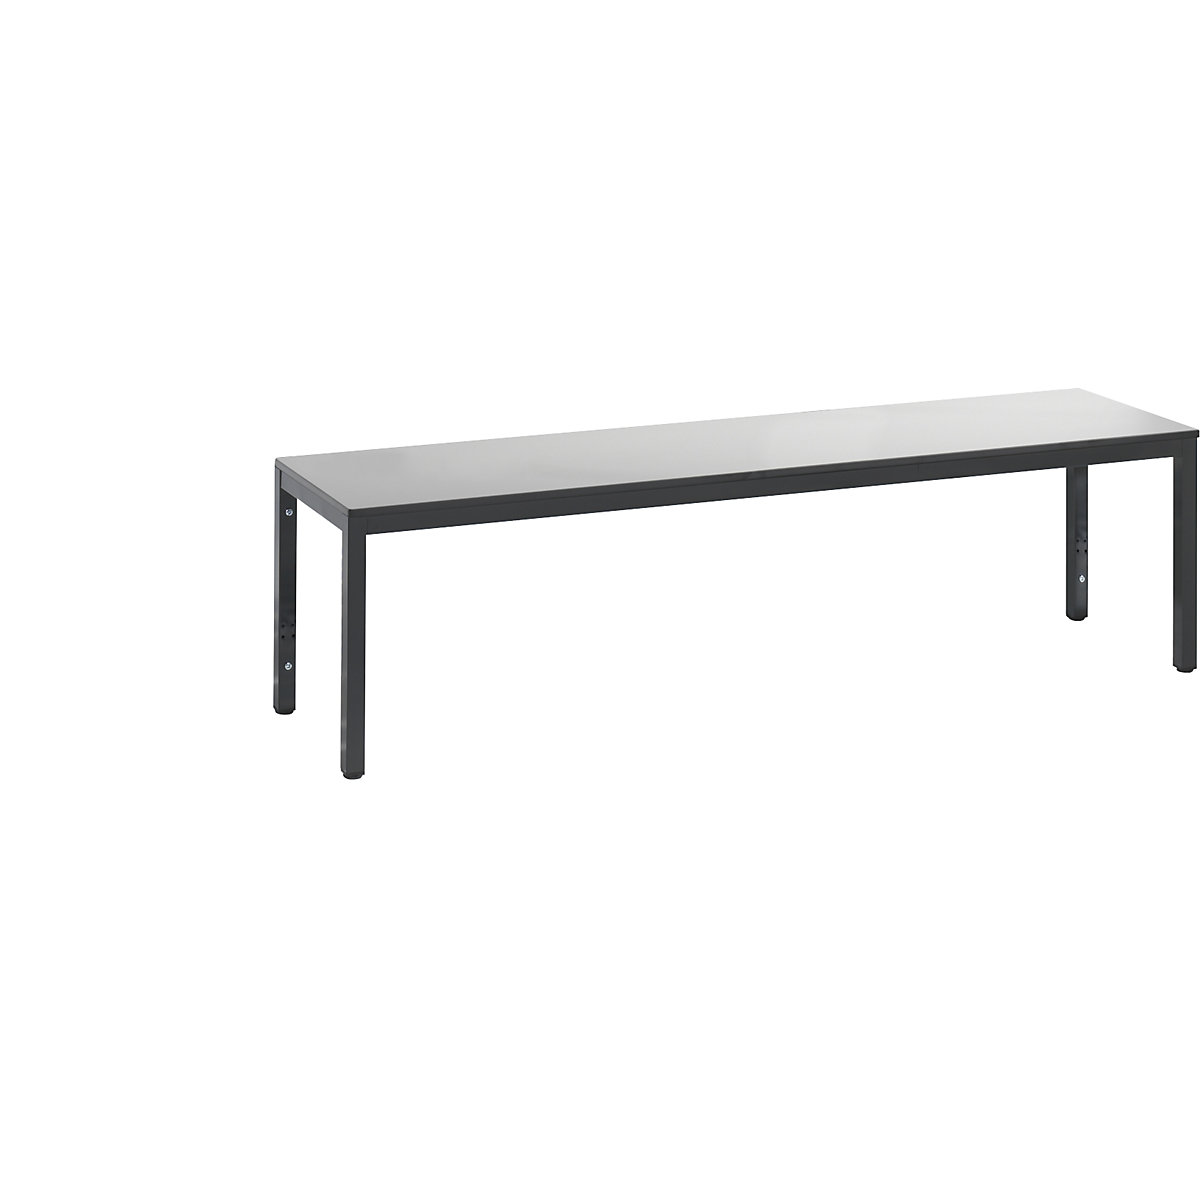 BASIC PLUS cloakroom bench – C+P, HPL seat surface, length 1500 mm, silver grey-3